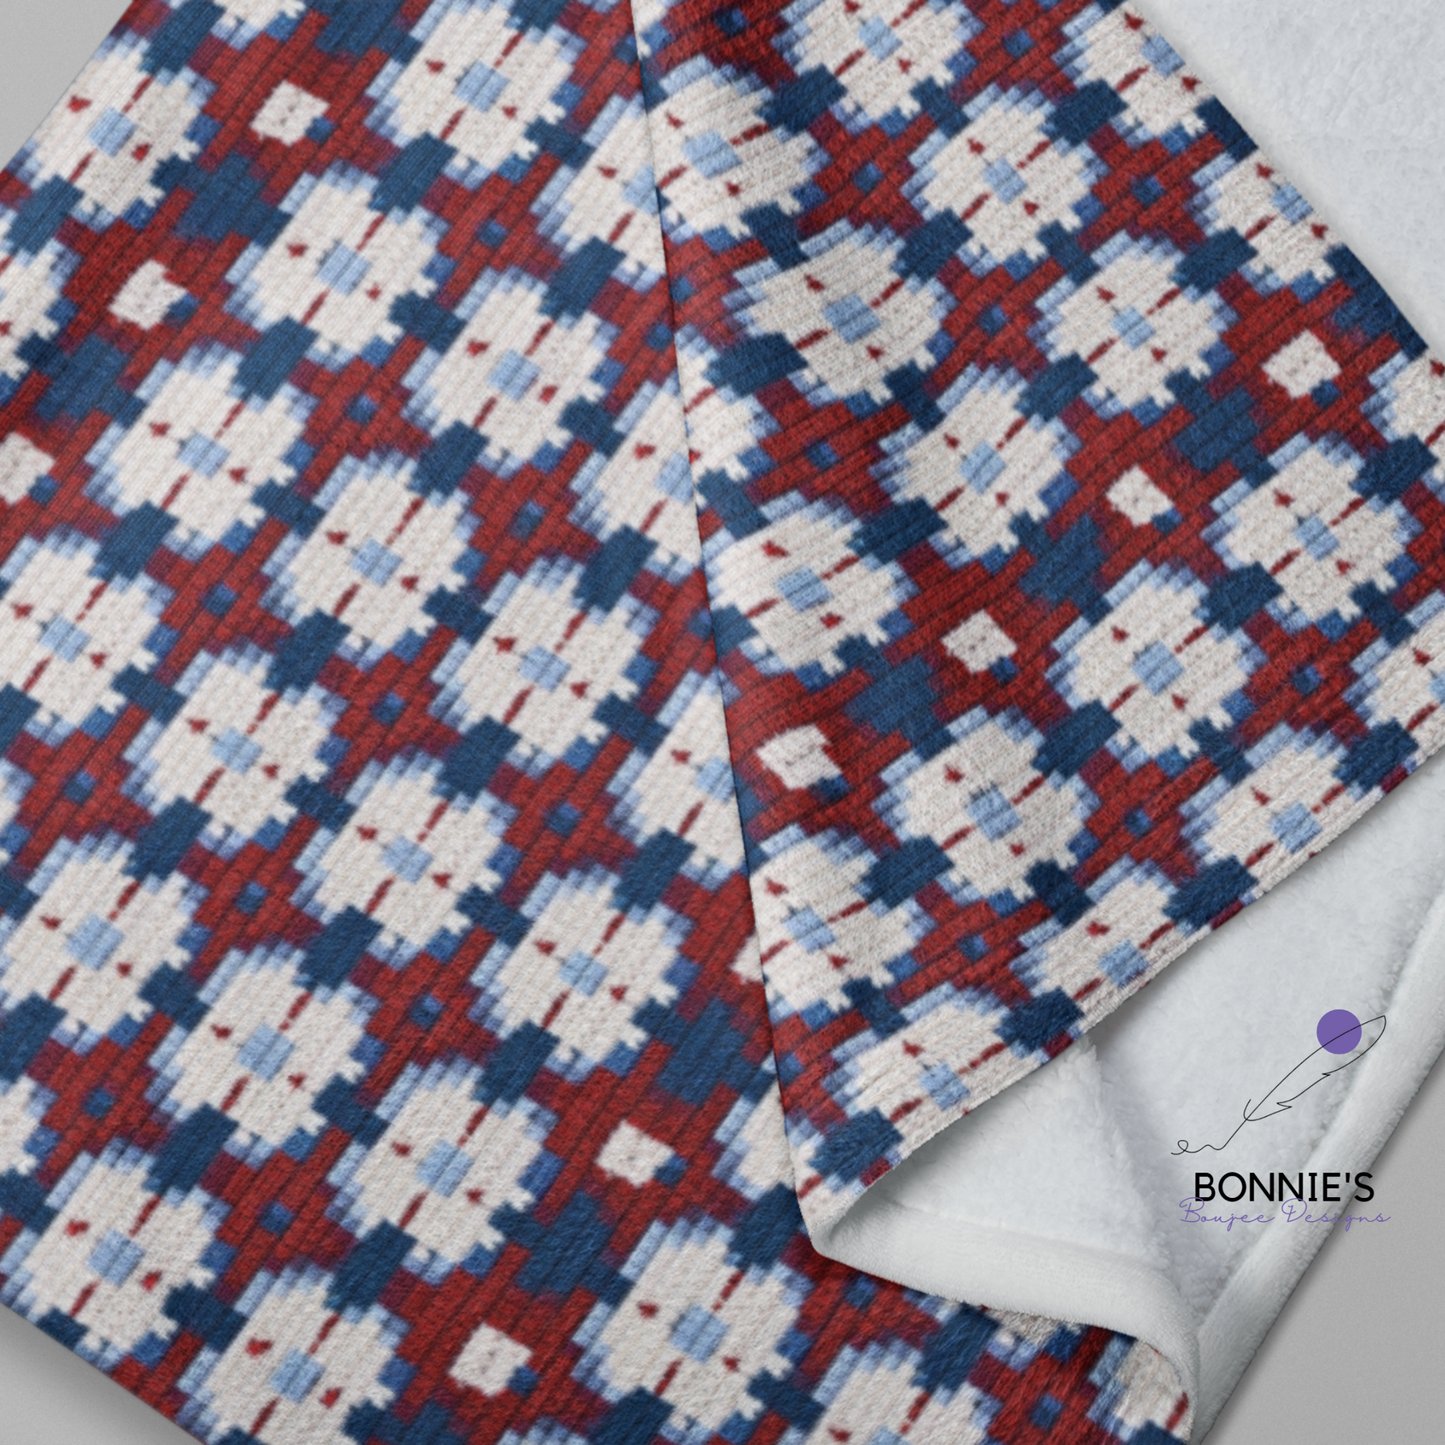 Crochet of Red, White and Blue Block Seamless File